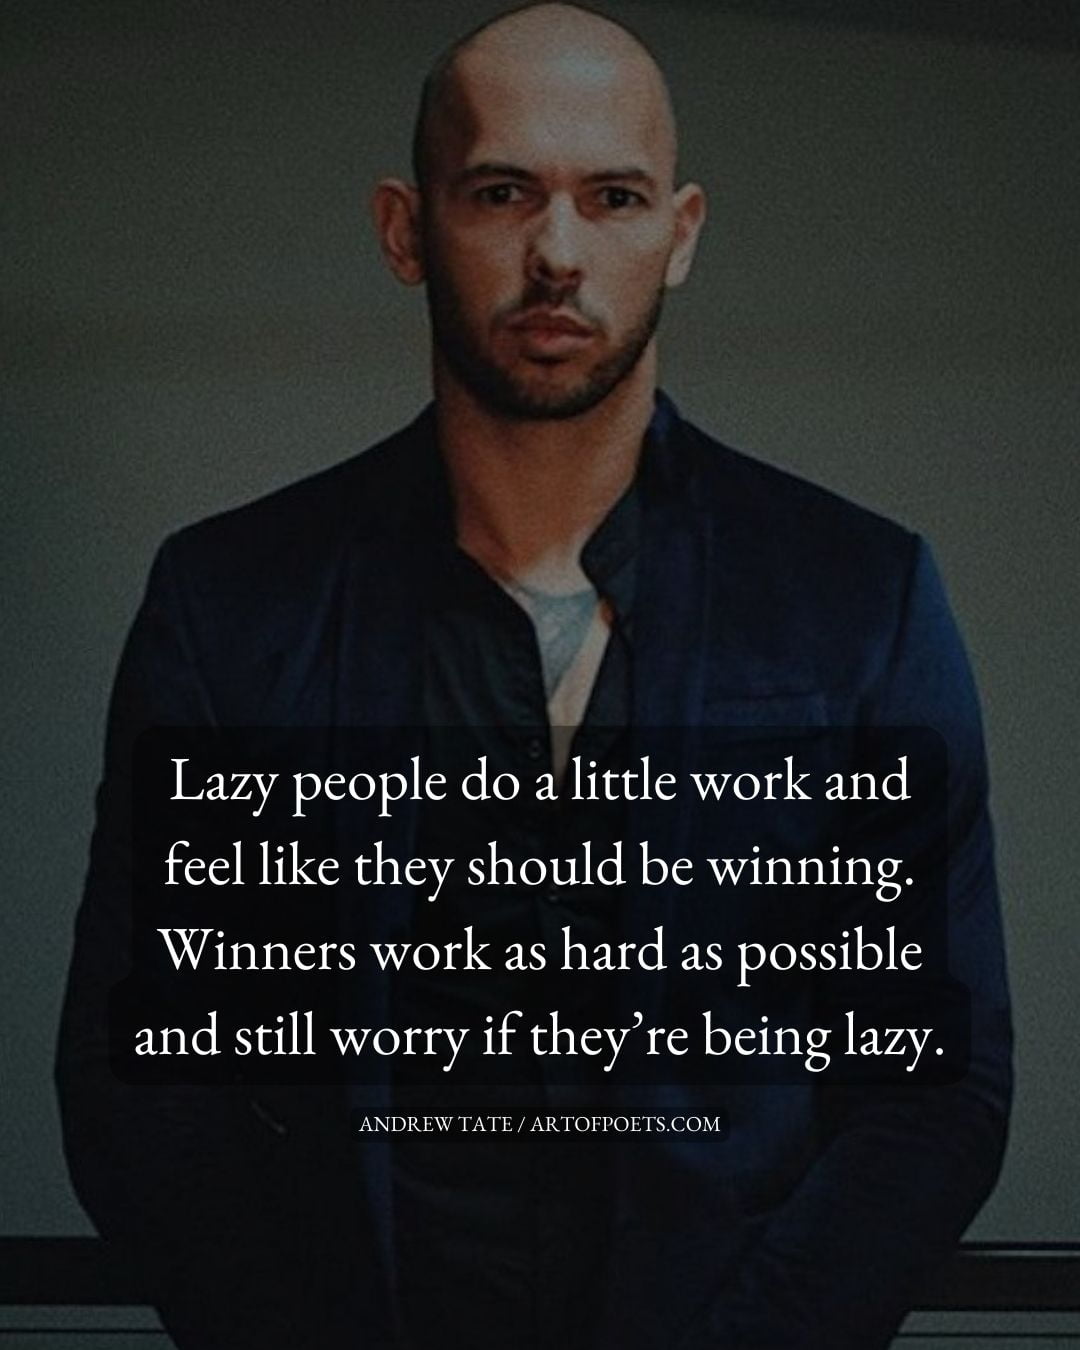 Lazy people do a little work and feel like they should be winning. Winners work as hard as possible and still worry if theyre being lazy 1